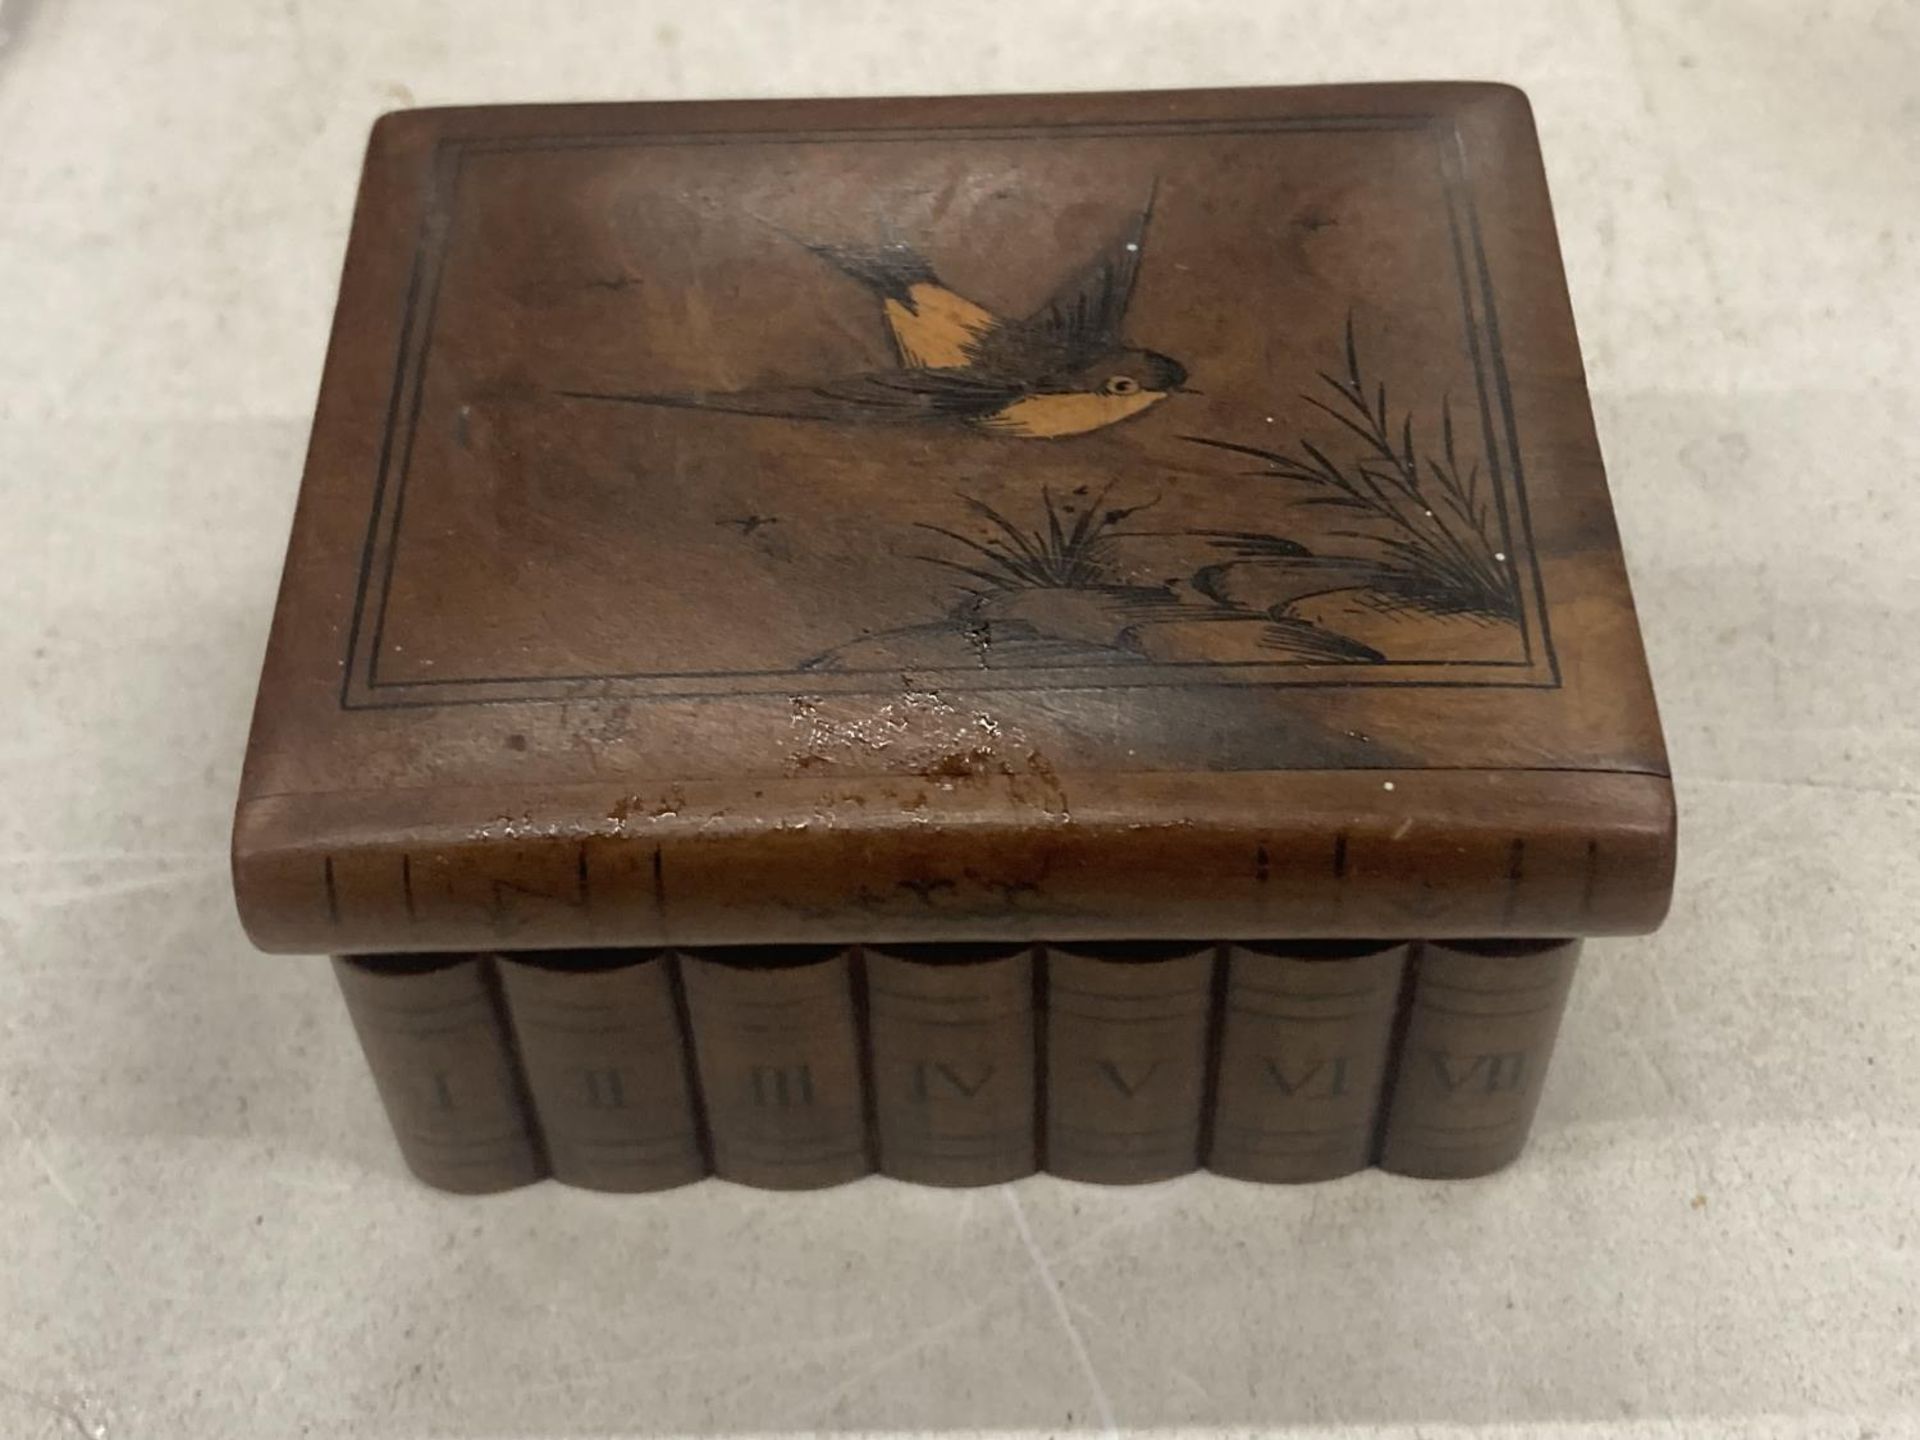 A SMALL INLAID WOODEN BOX